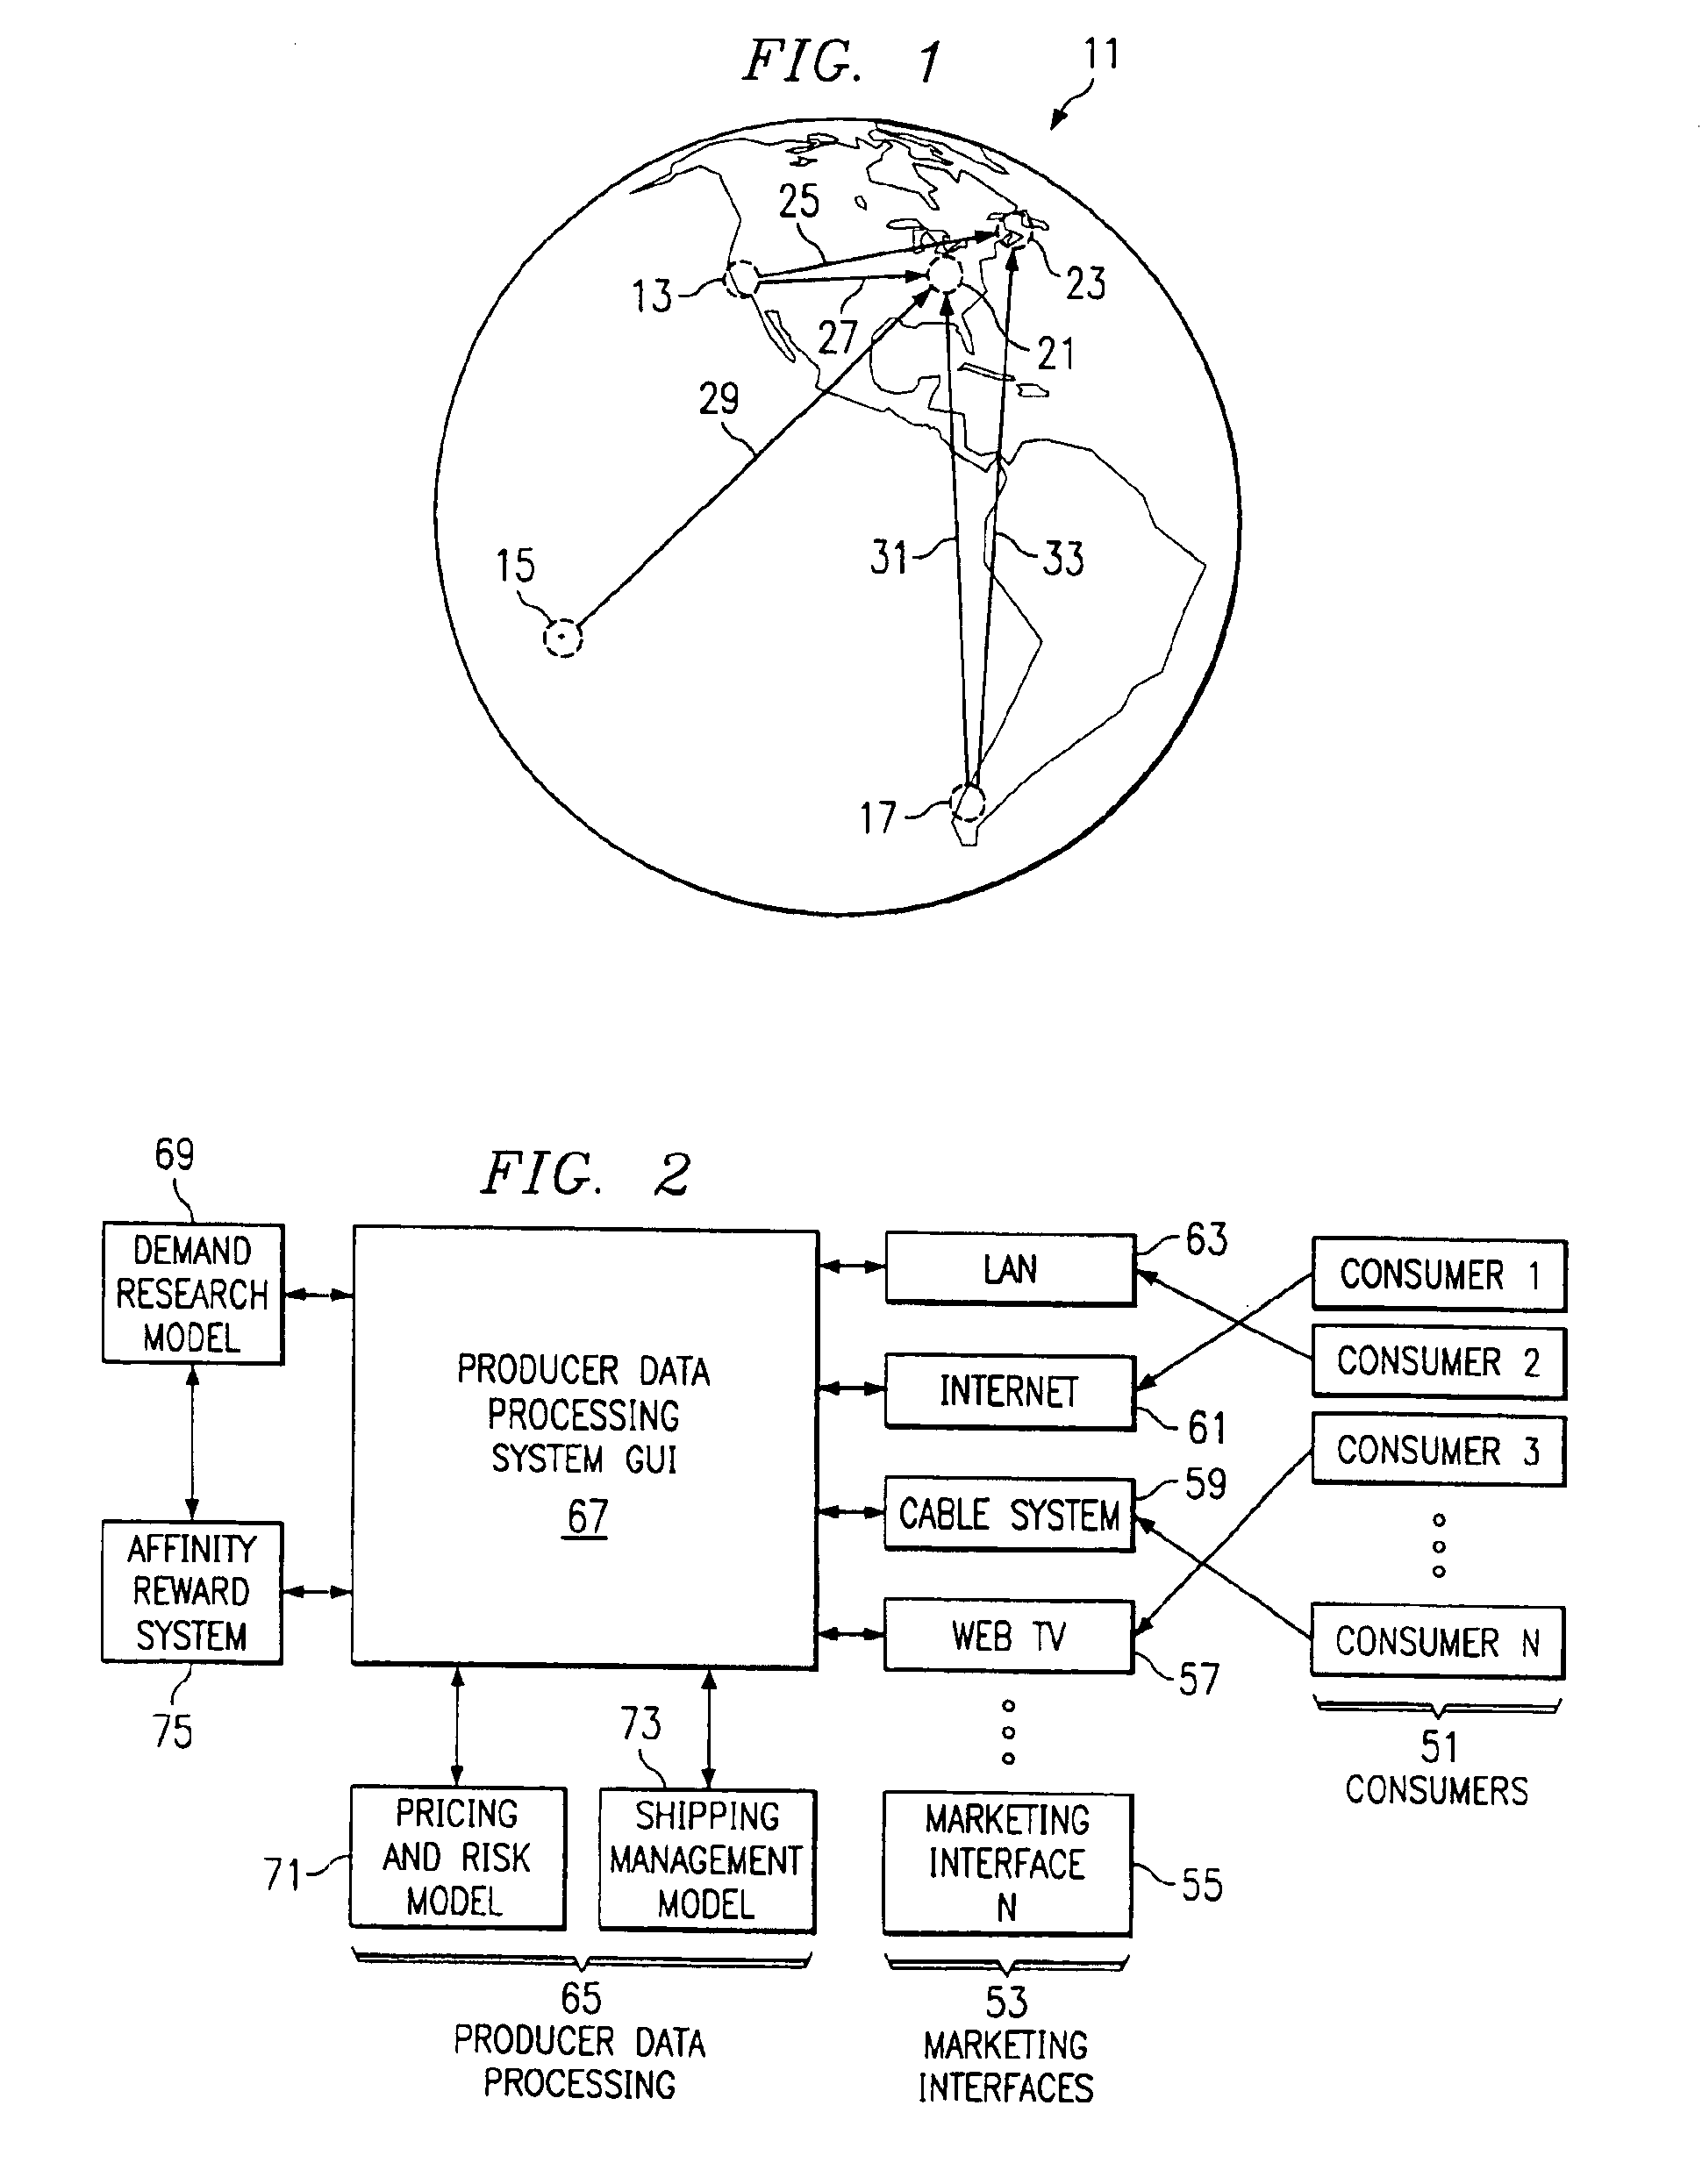 Method of producing, selling, and distributing articles of manufacture